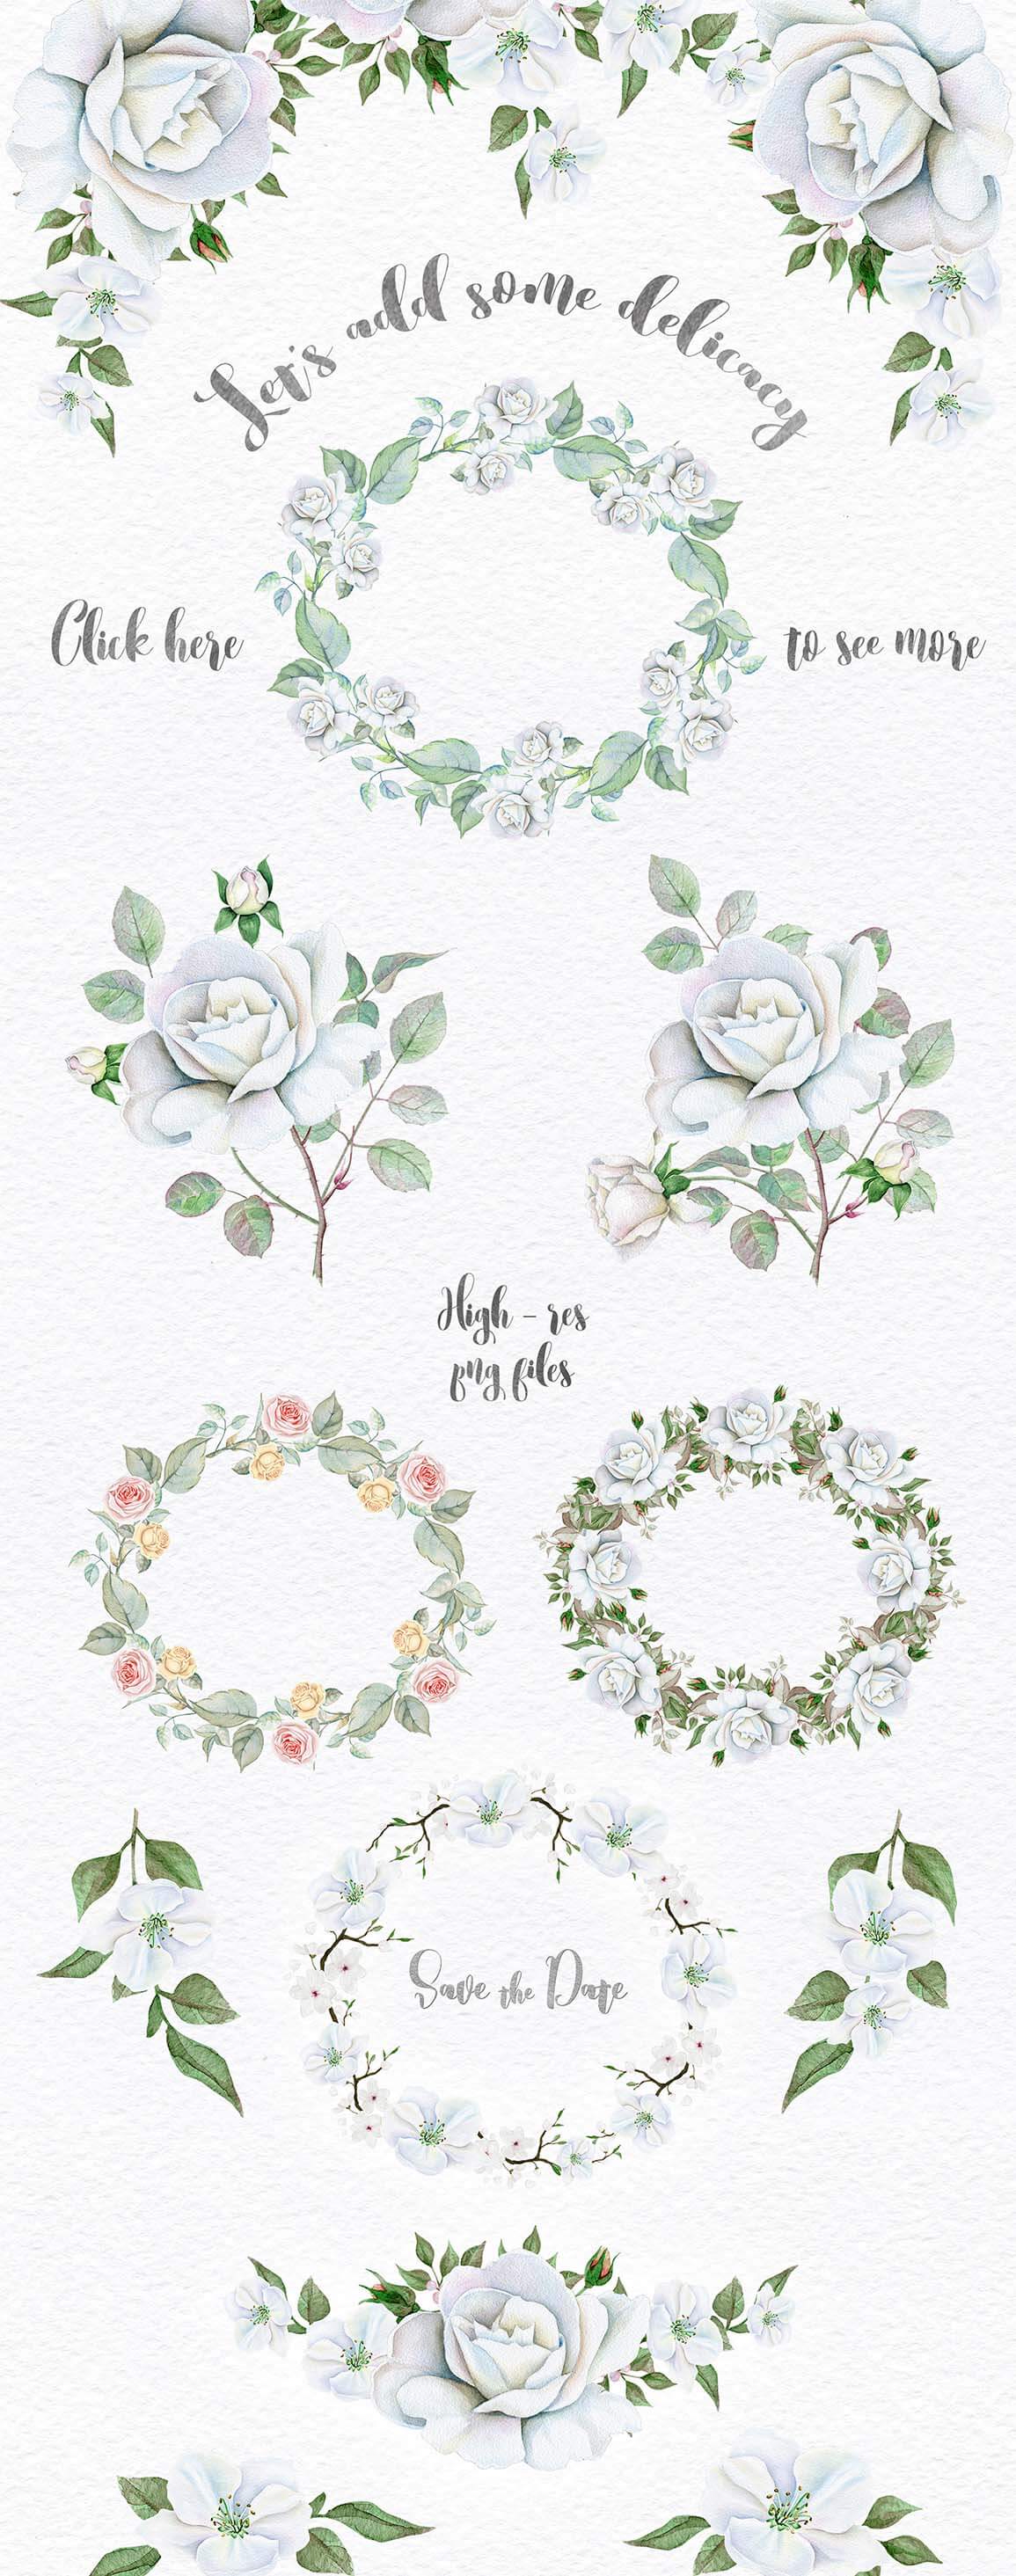 Wreaths and Bouquets collection